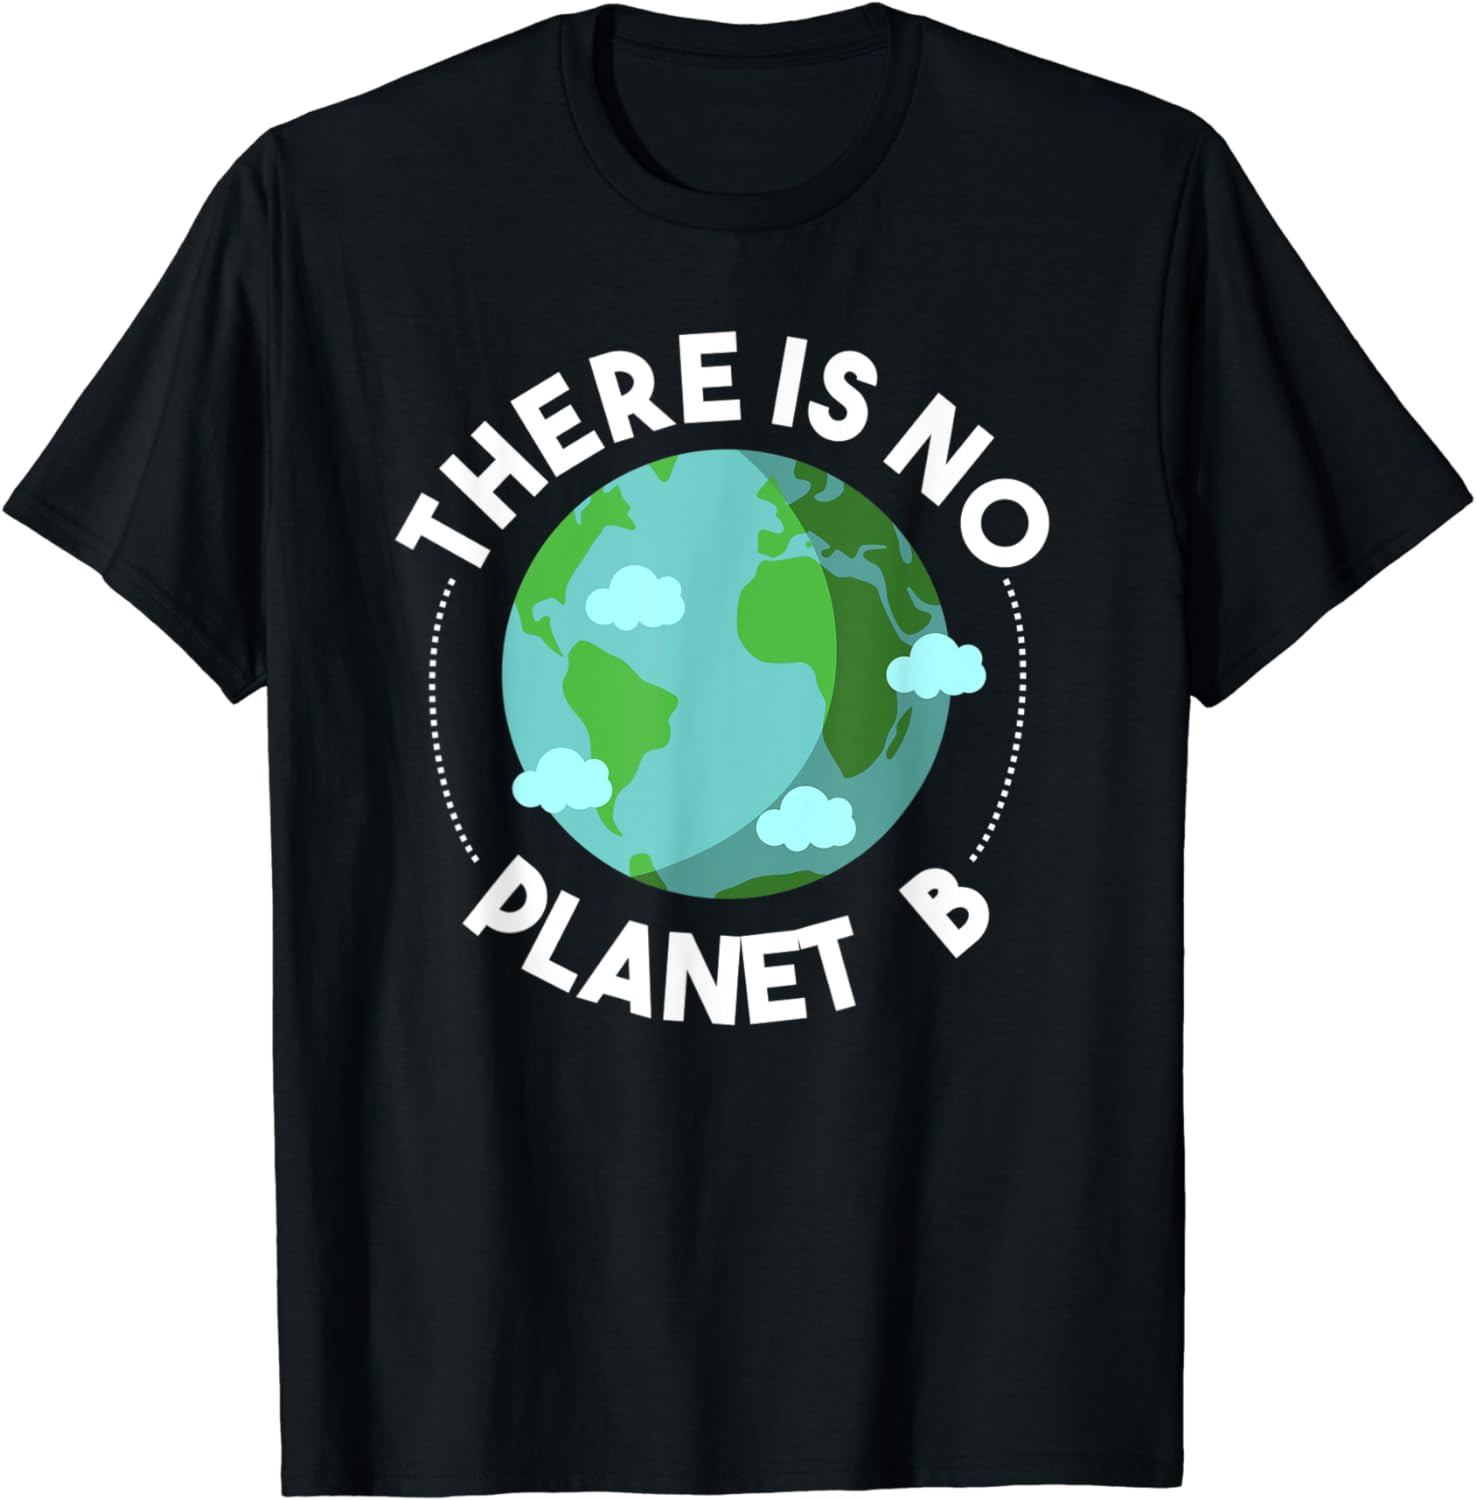 There Is No Planet B - Environmental T-Shirt For Men Women